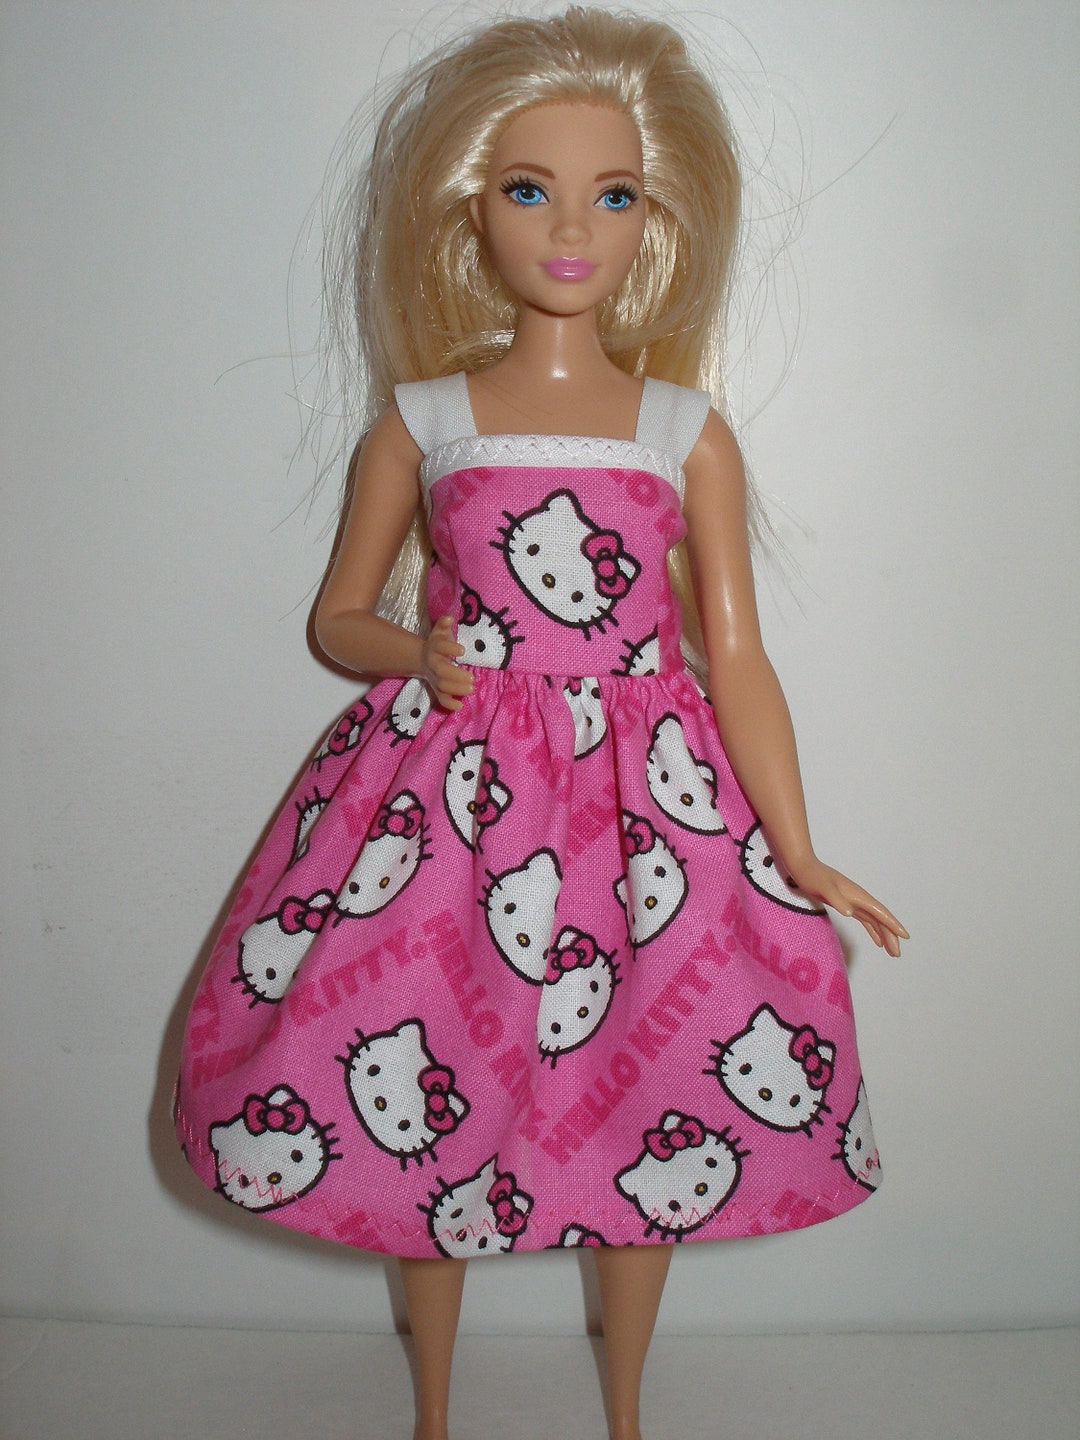 Barbie Fabric Barbie With Poodle Material Barbie With Kitten